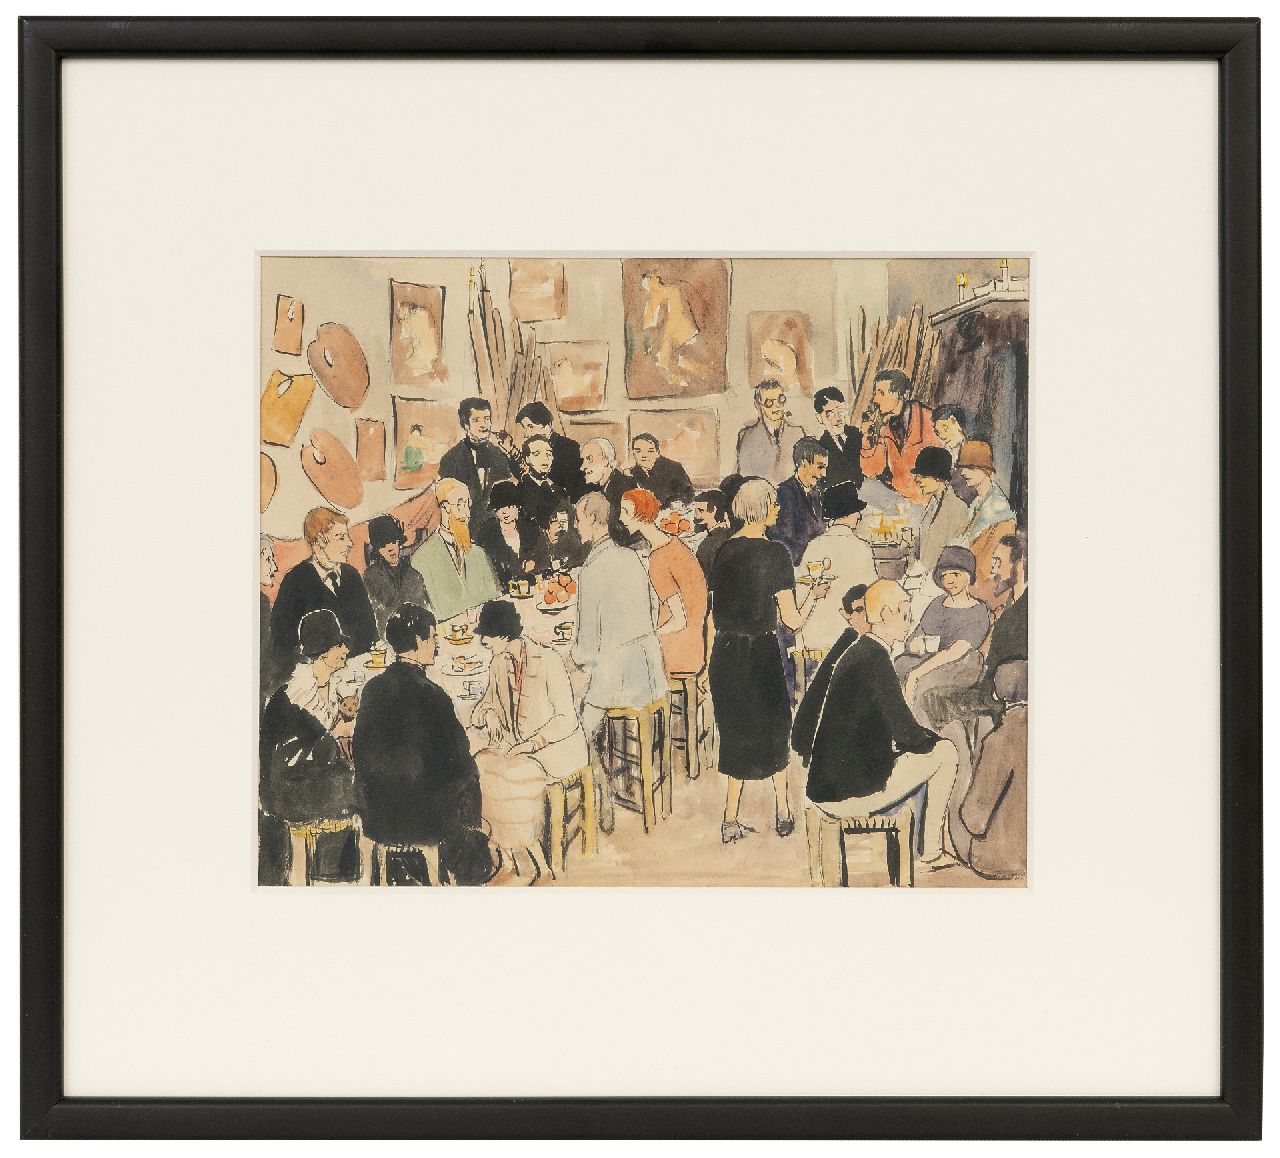 Leese G.  | Gertrude Leese | Watercolours and drawings offered for sale | Le Fauconnier, party at the Académie de la Palette, watercolour on paper 25.0 x 29.9 cm